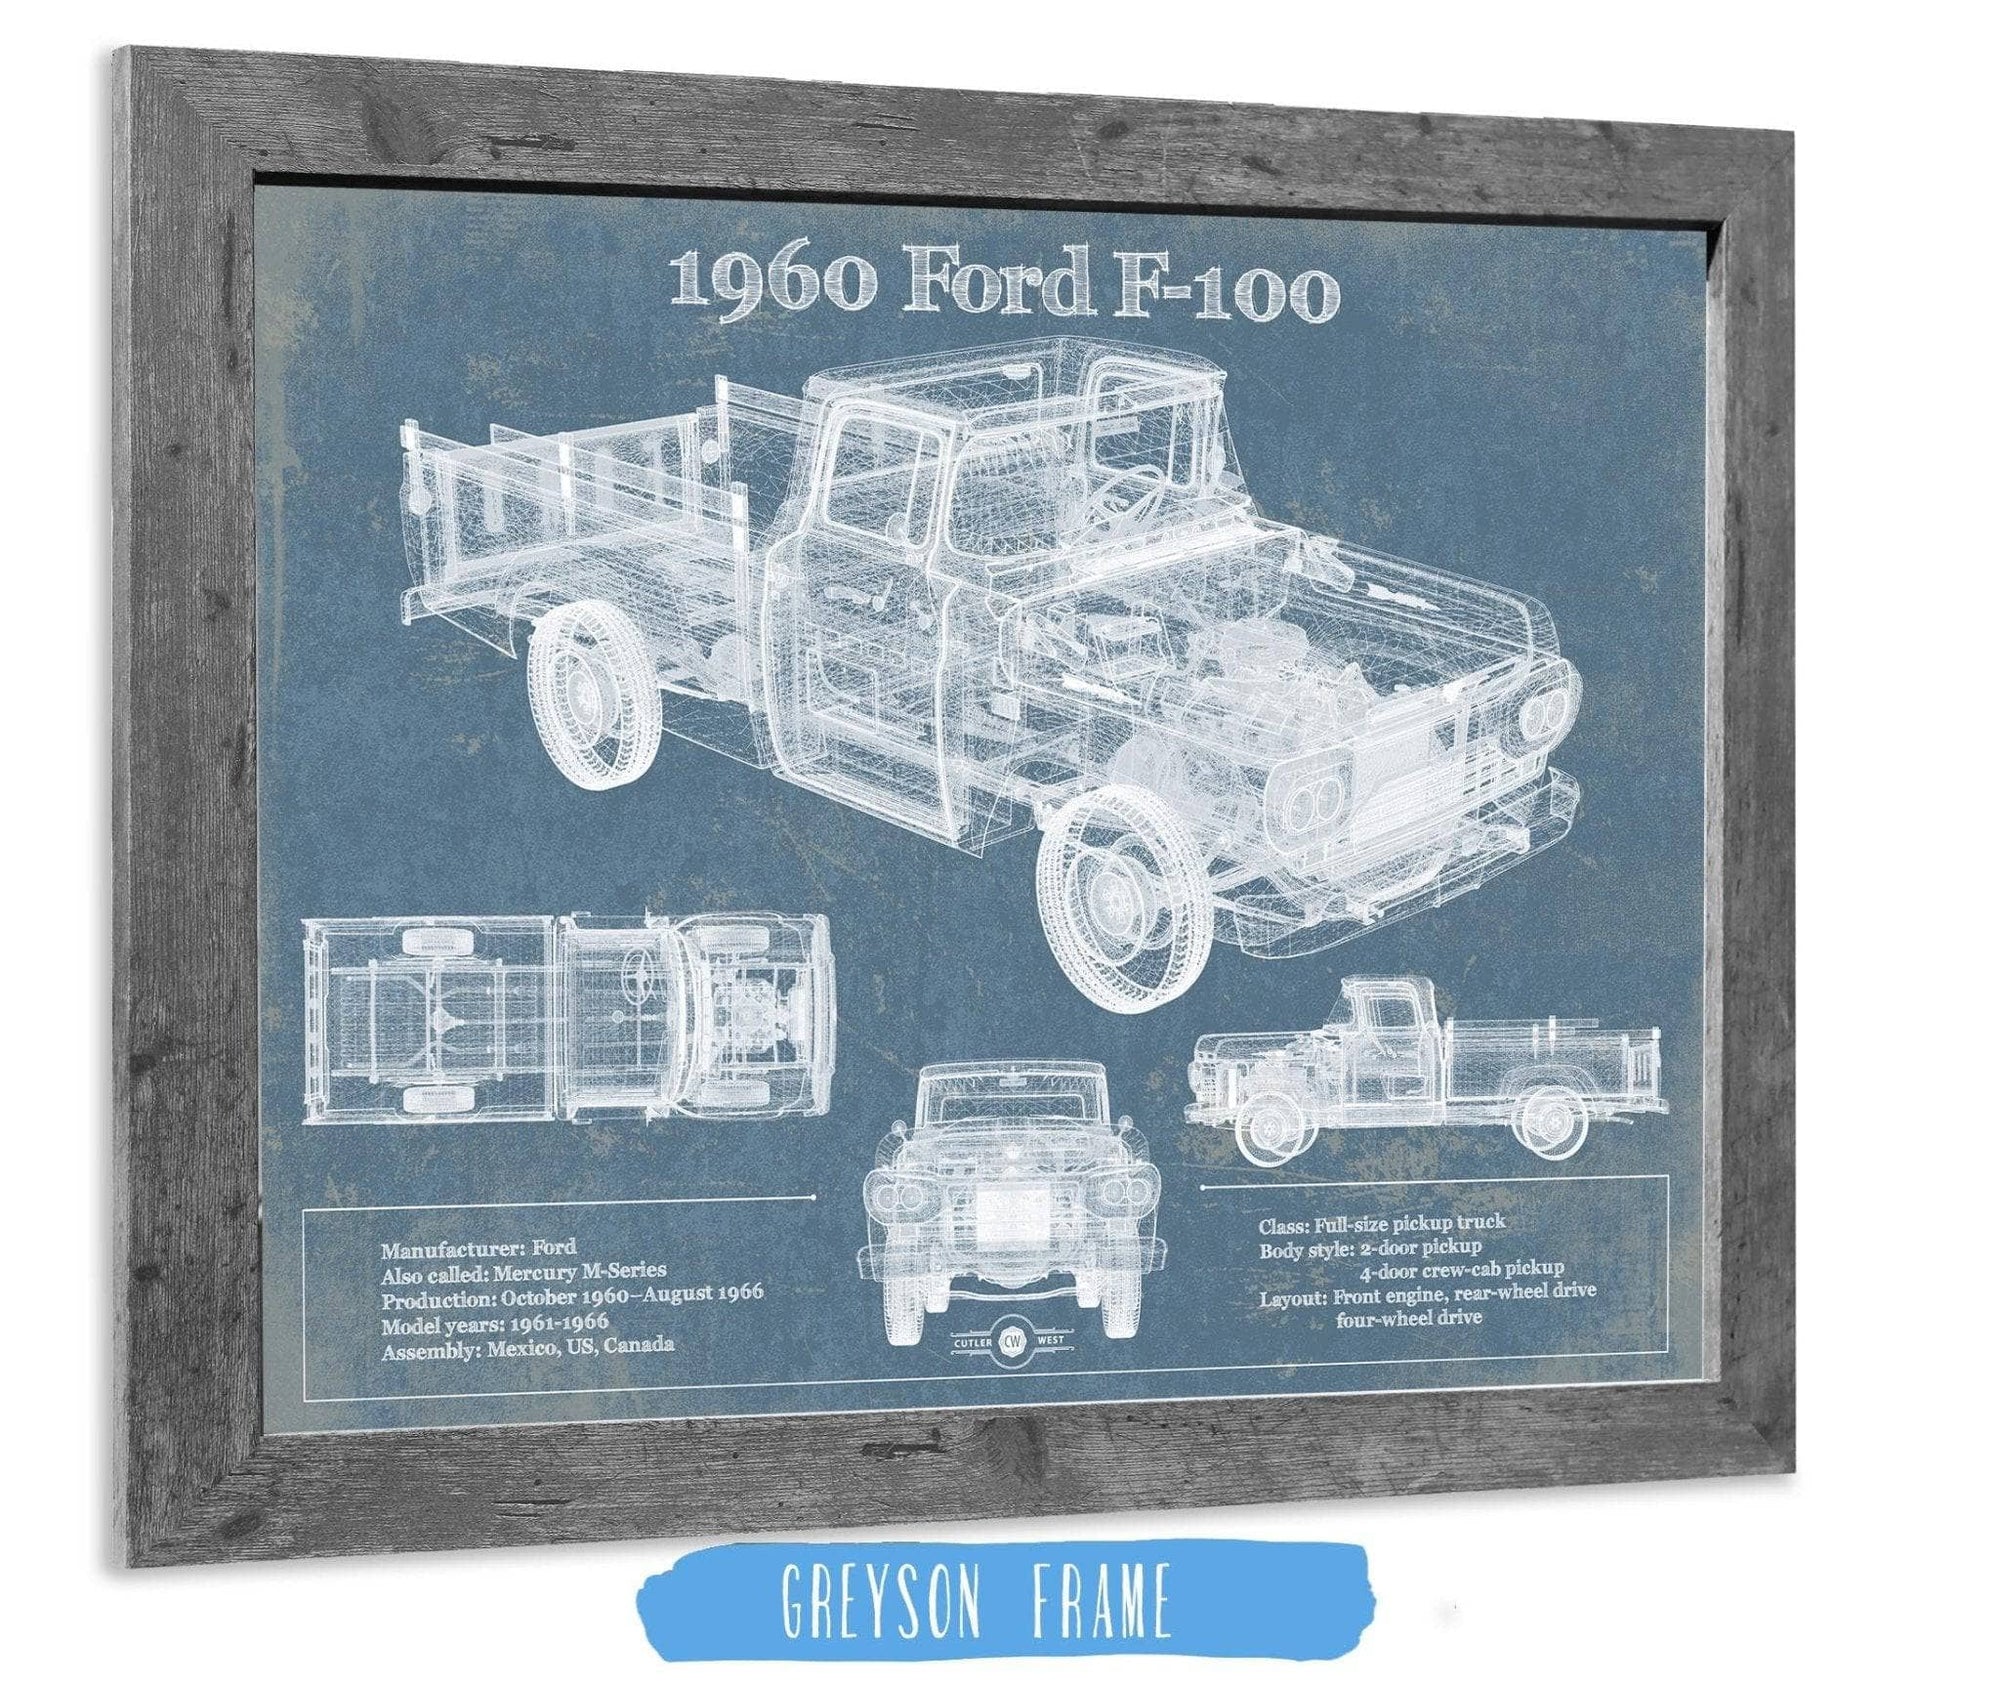 Cutler West Ford Collection 14" x 11" / Greyson Frame 1960 Ford F-100 Blueprint Vintage Auto Print 933311072_11811